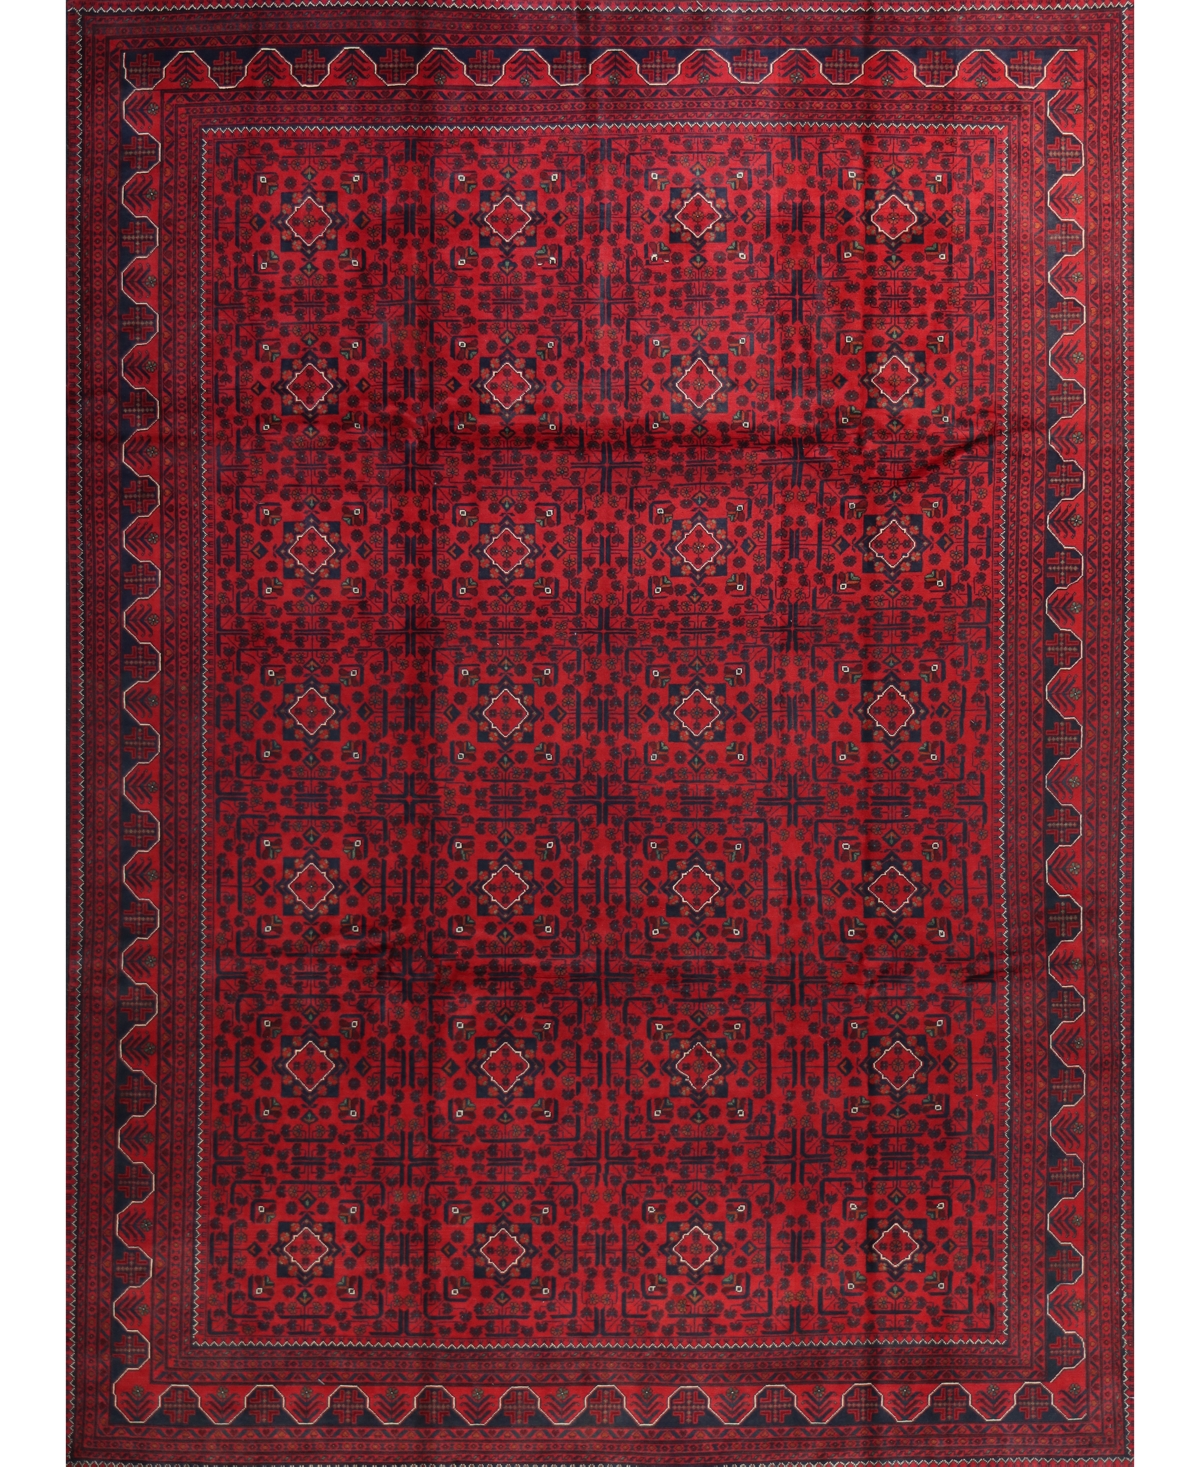 Bb Rugs One of a Kind Fine Beshir 8'1in x 11' Area Rug - Red